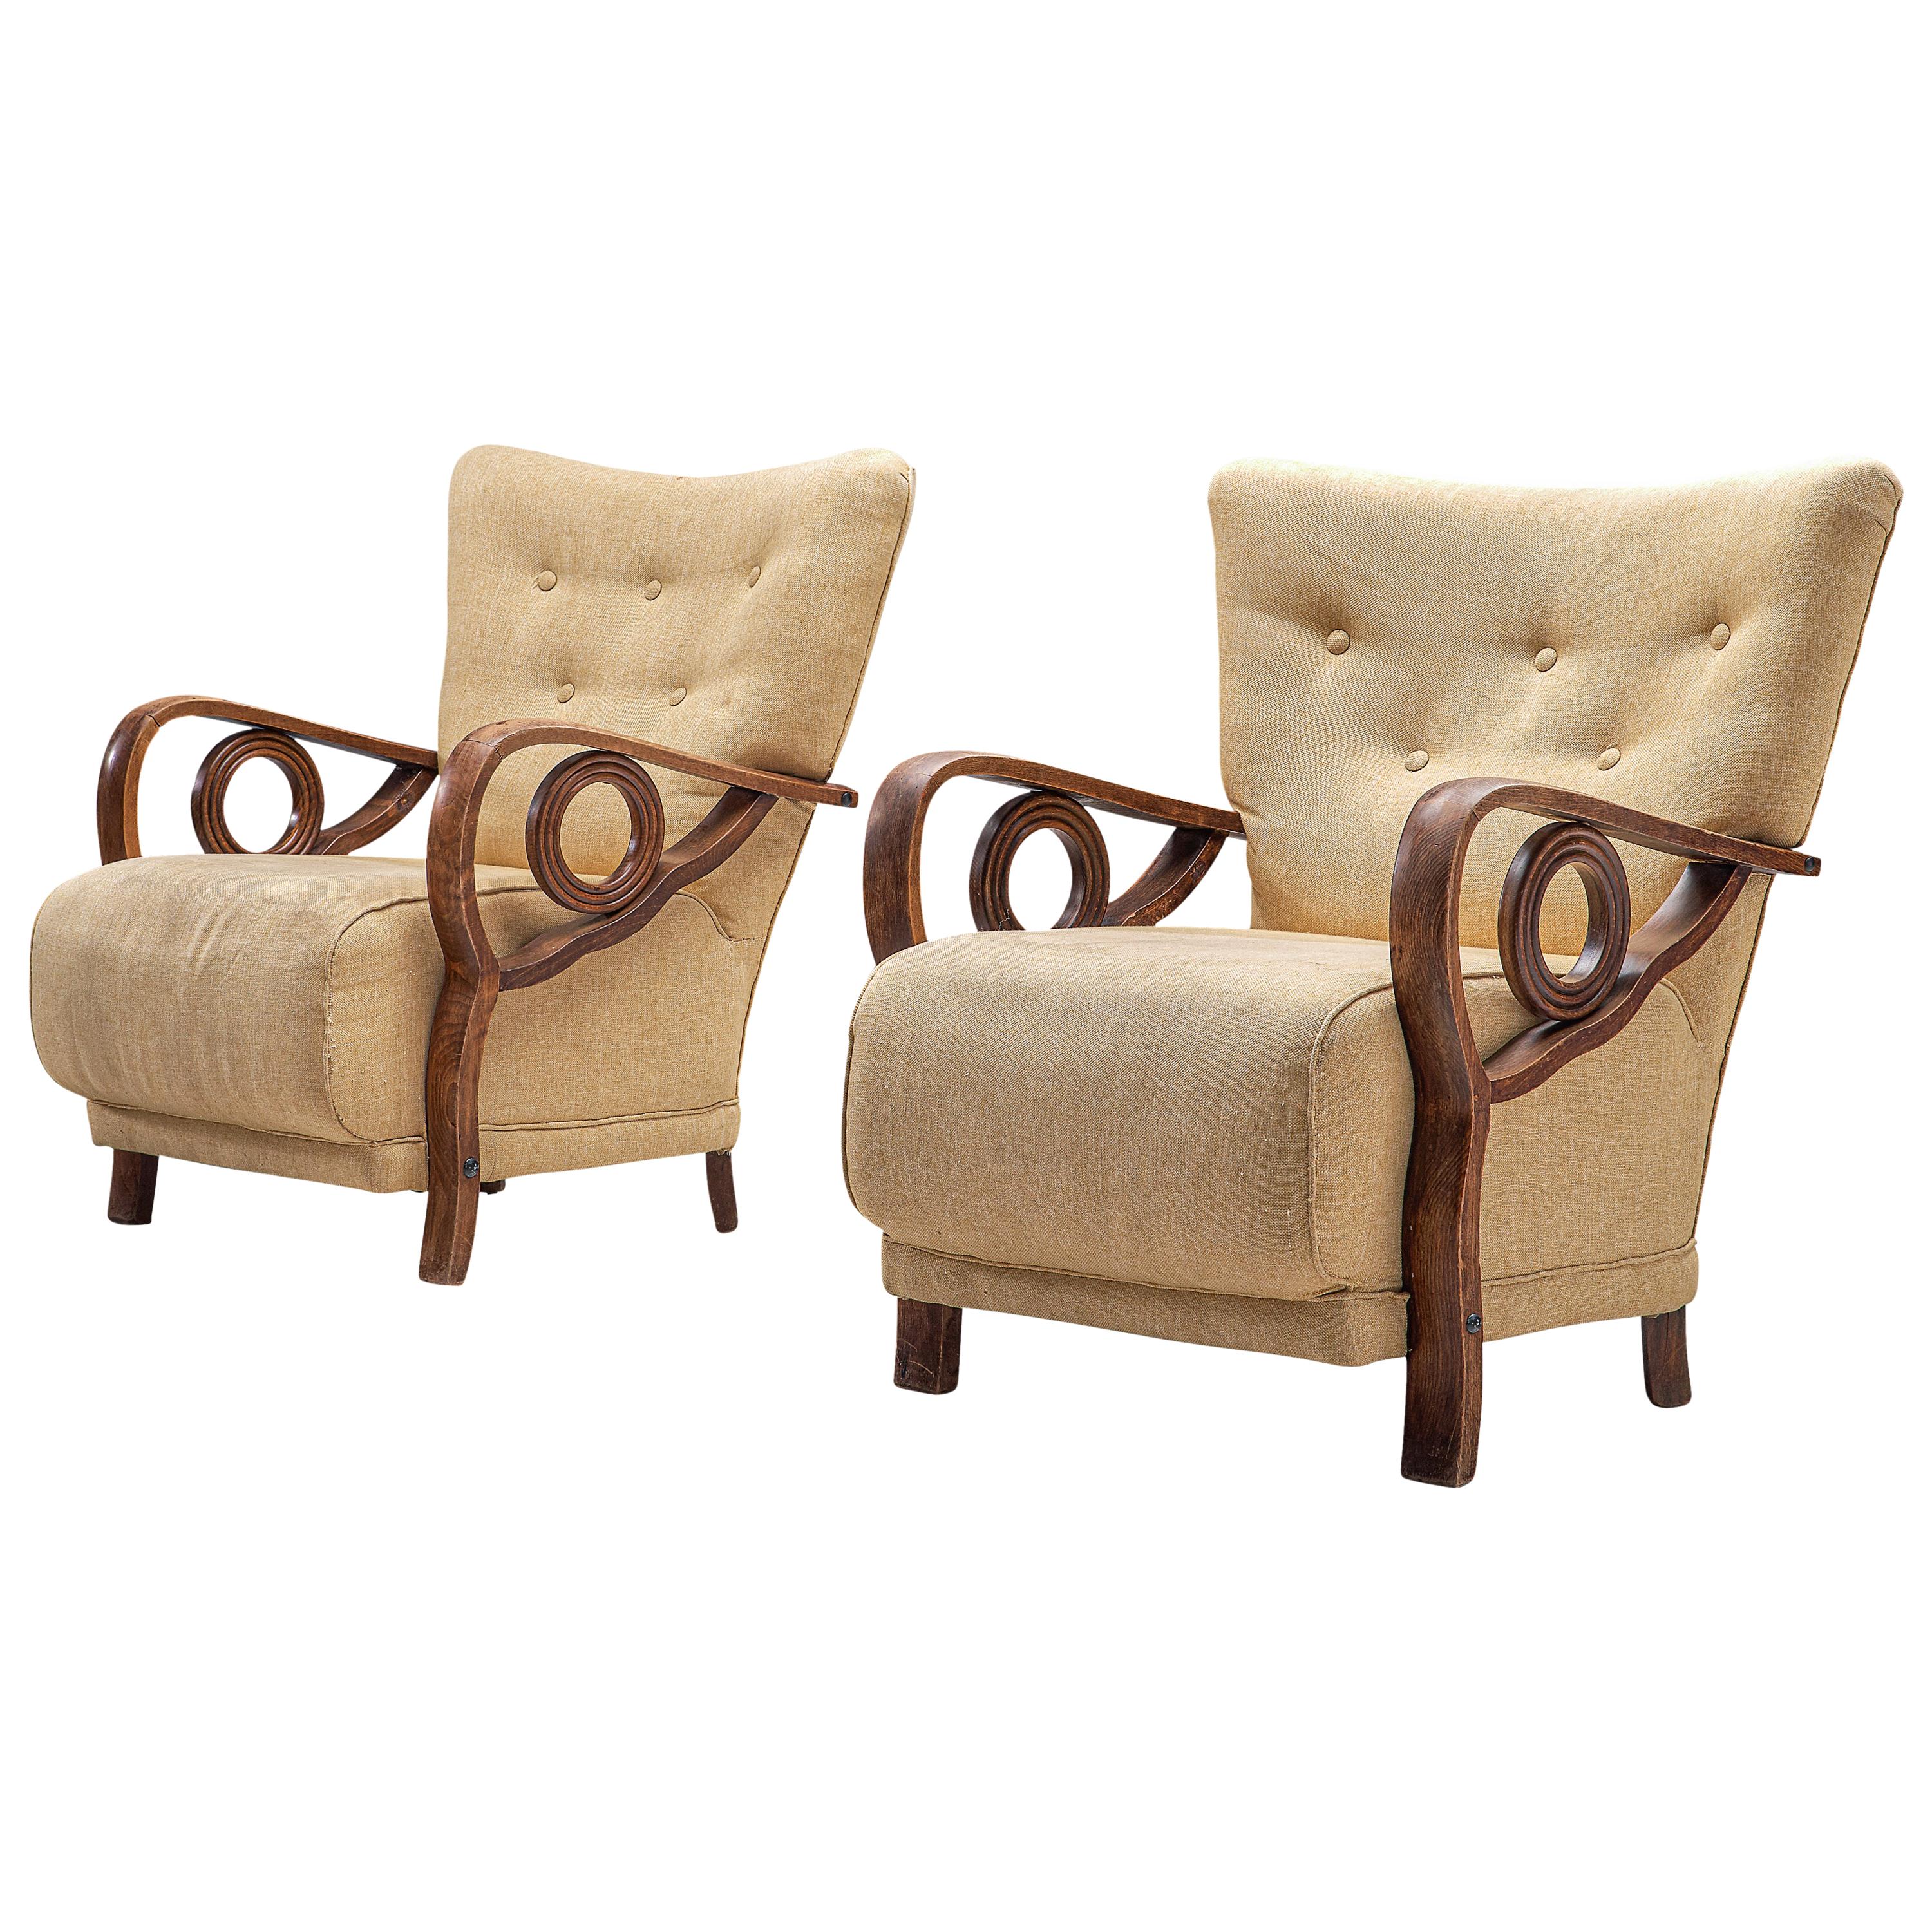 Pair of Art Deco Lounge Chairs in Oak and Fabric